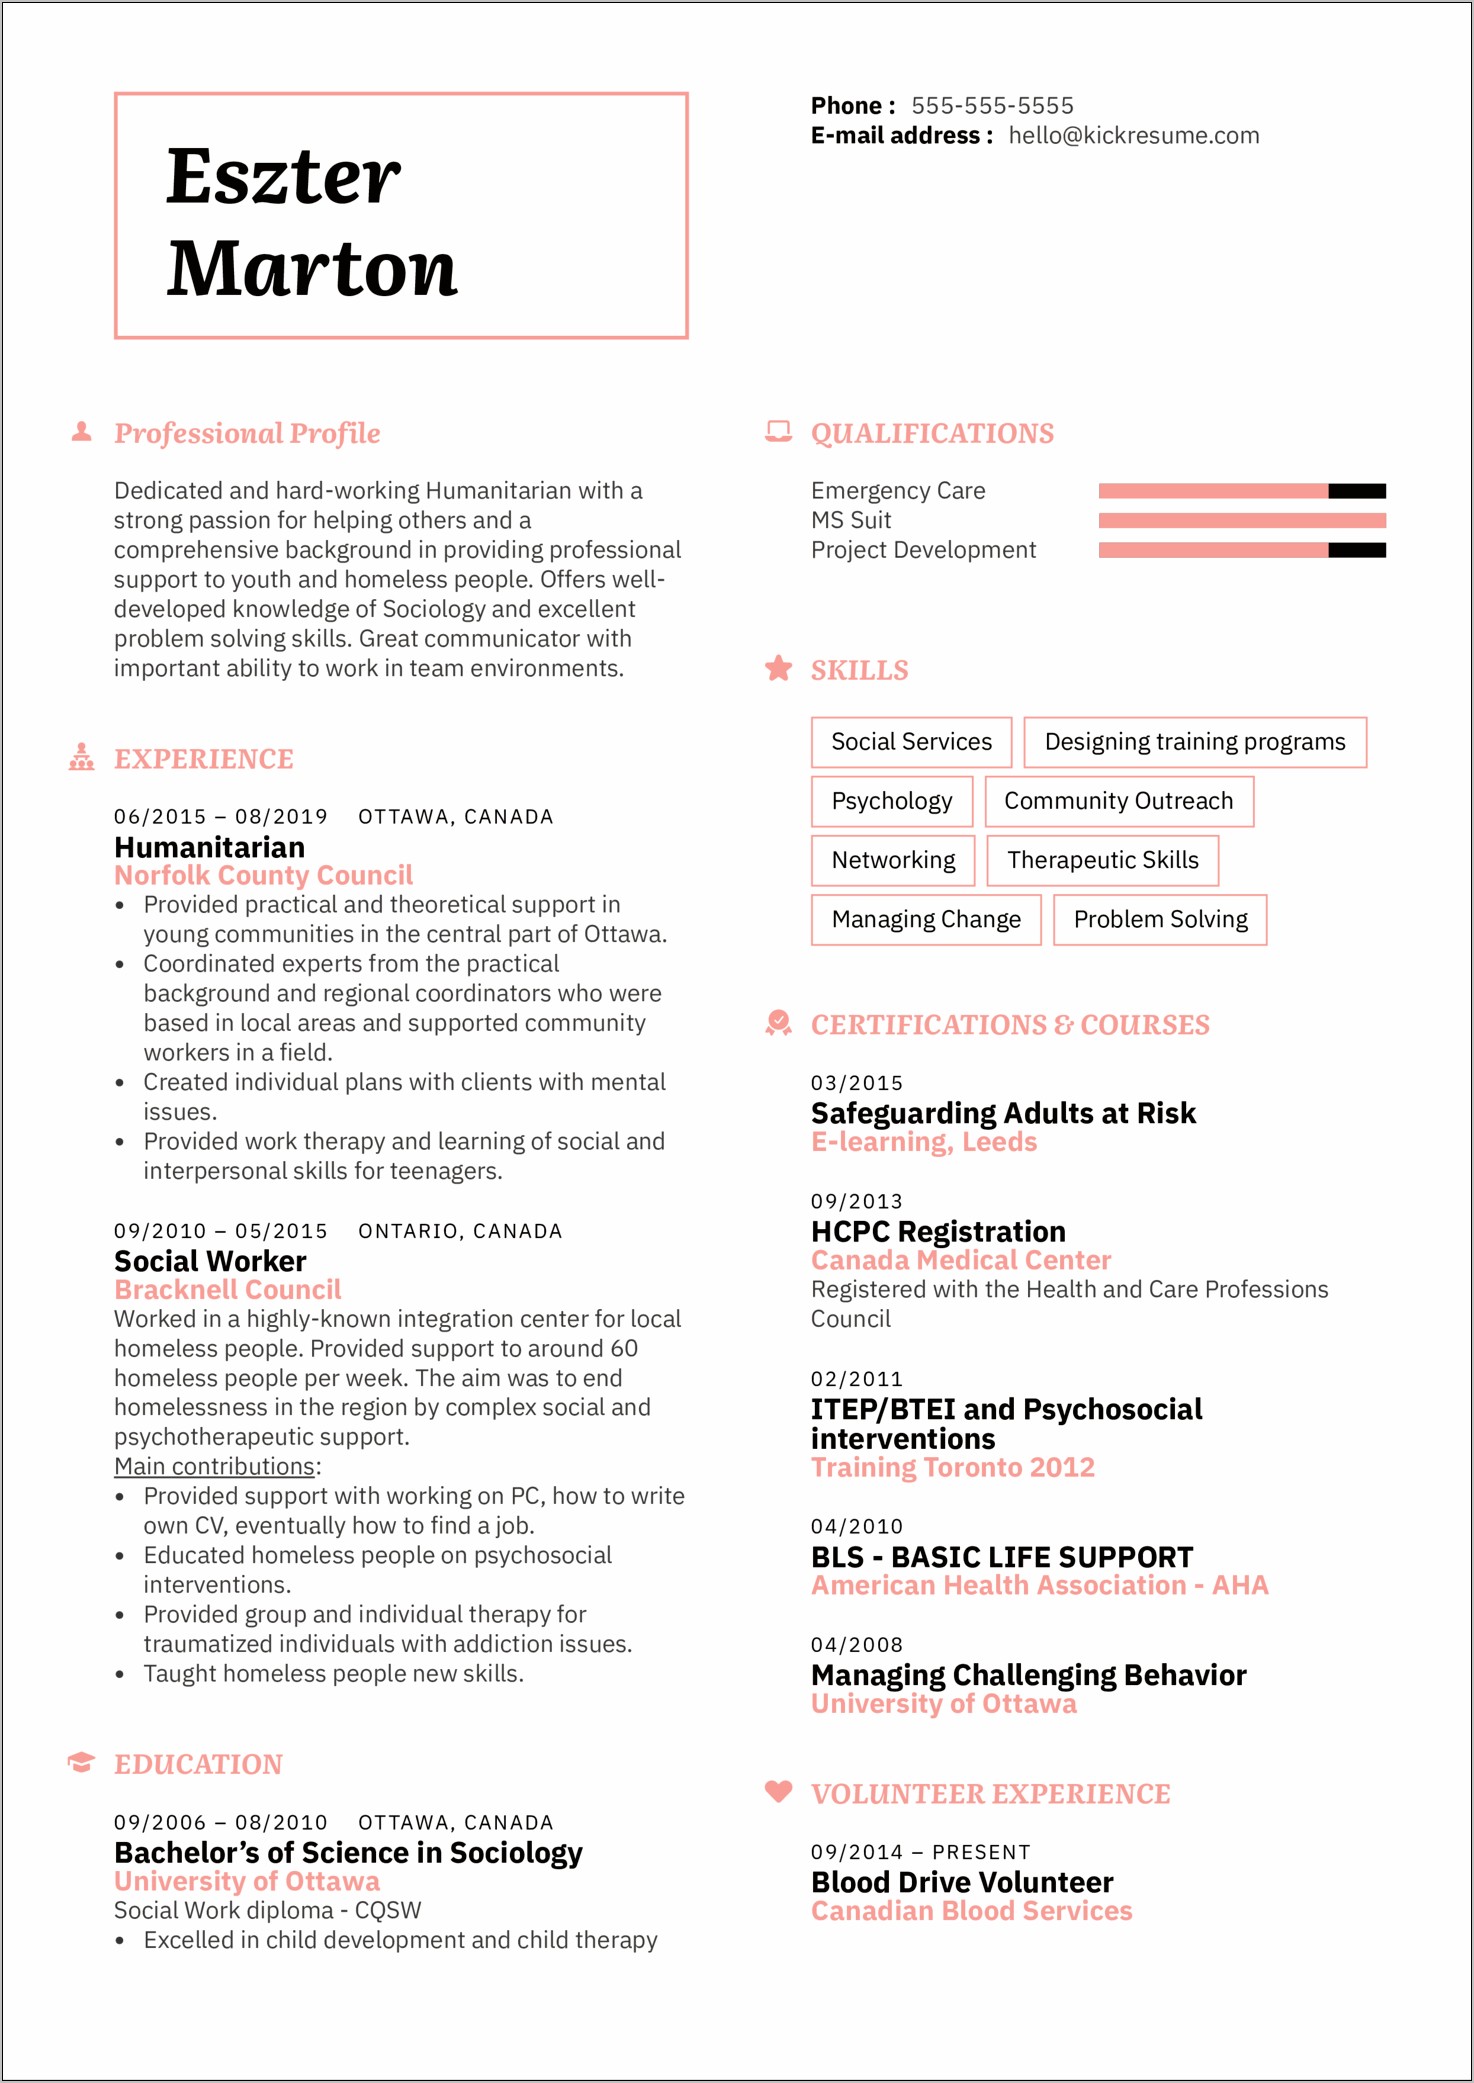 Resume For Working With At Risk Youth